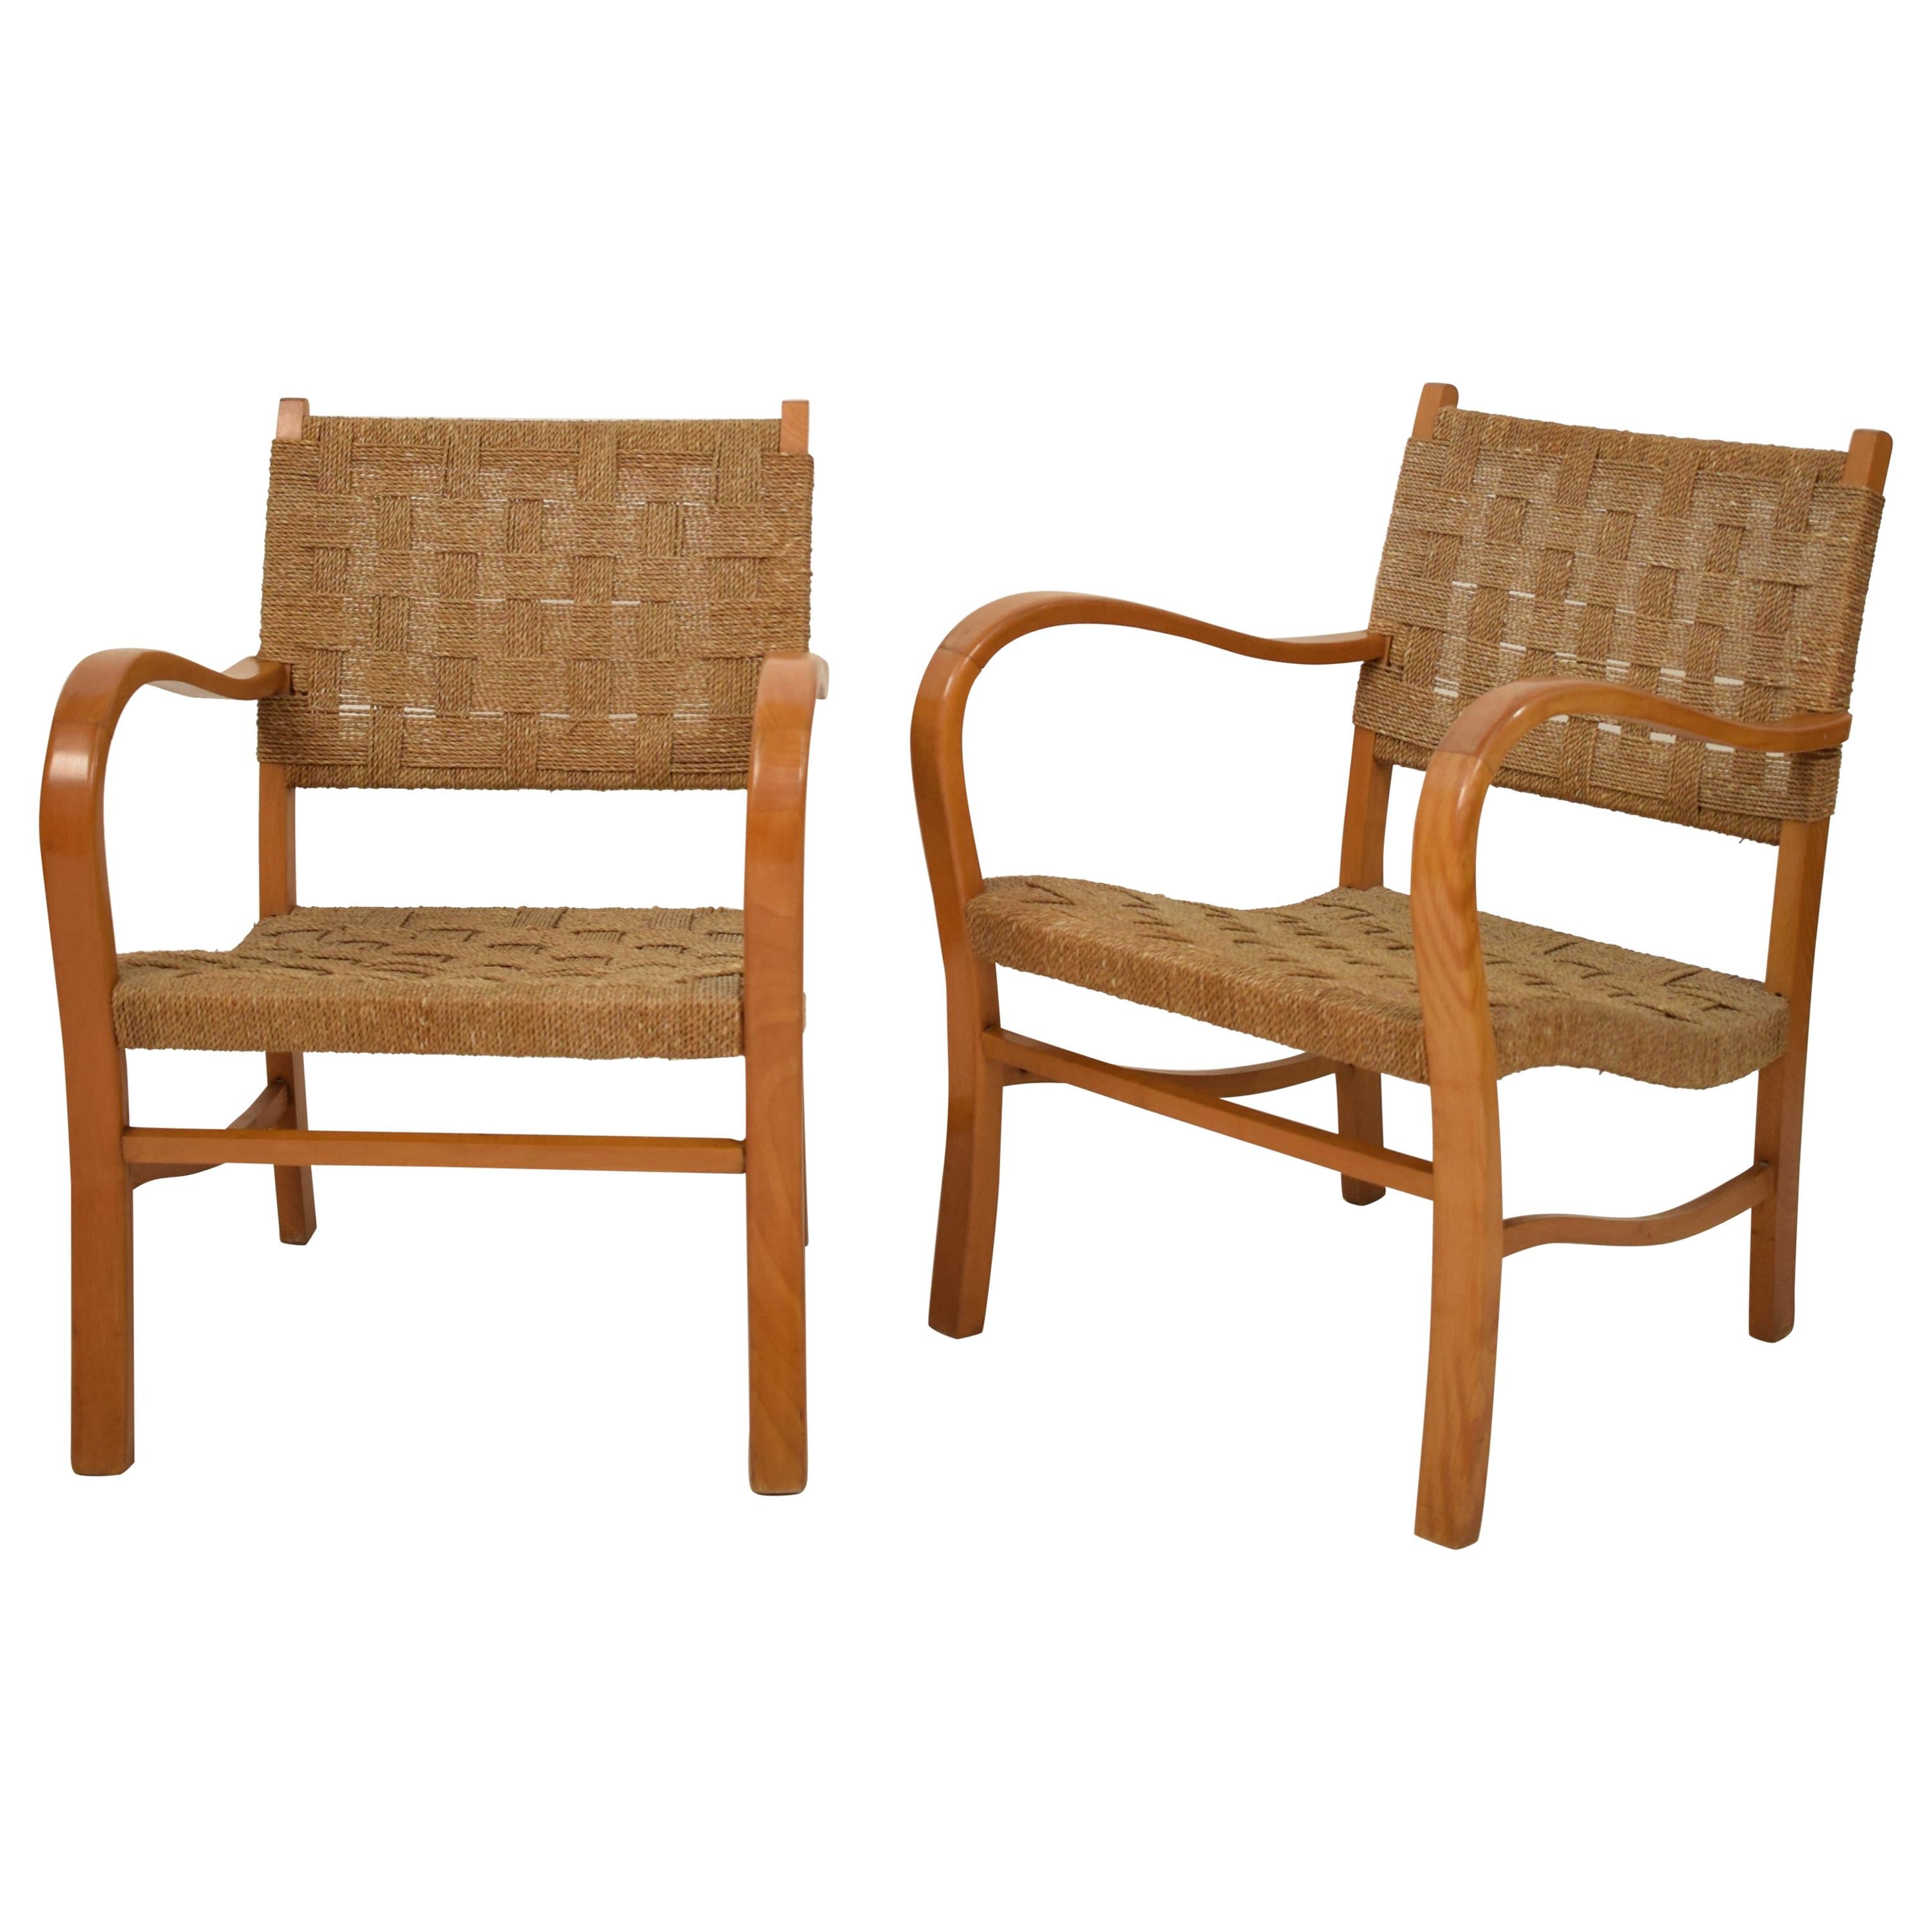 Pair of 1920 Bauhaus Beech and Woven Rope / Cane Armchairs by Erich Dieckmann